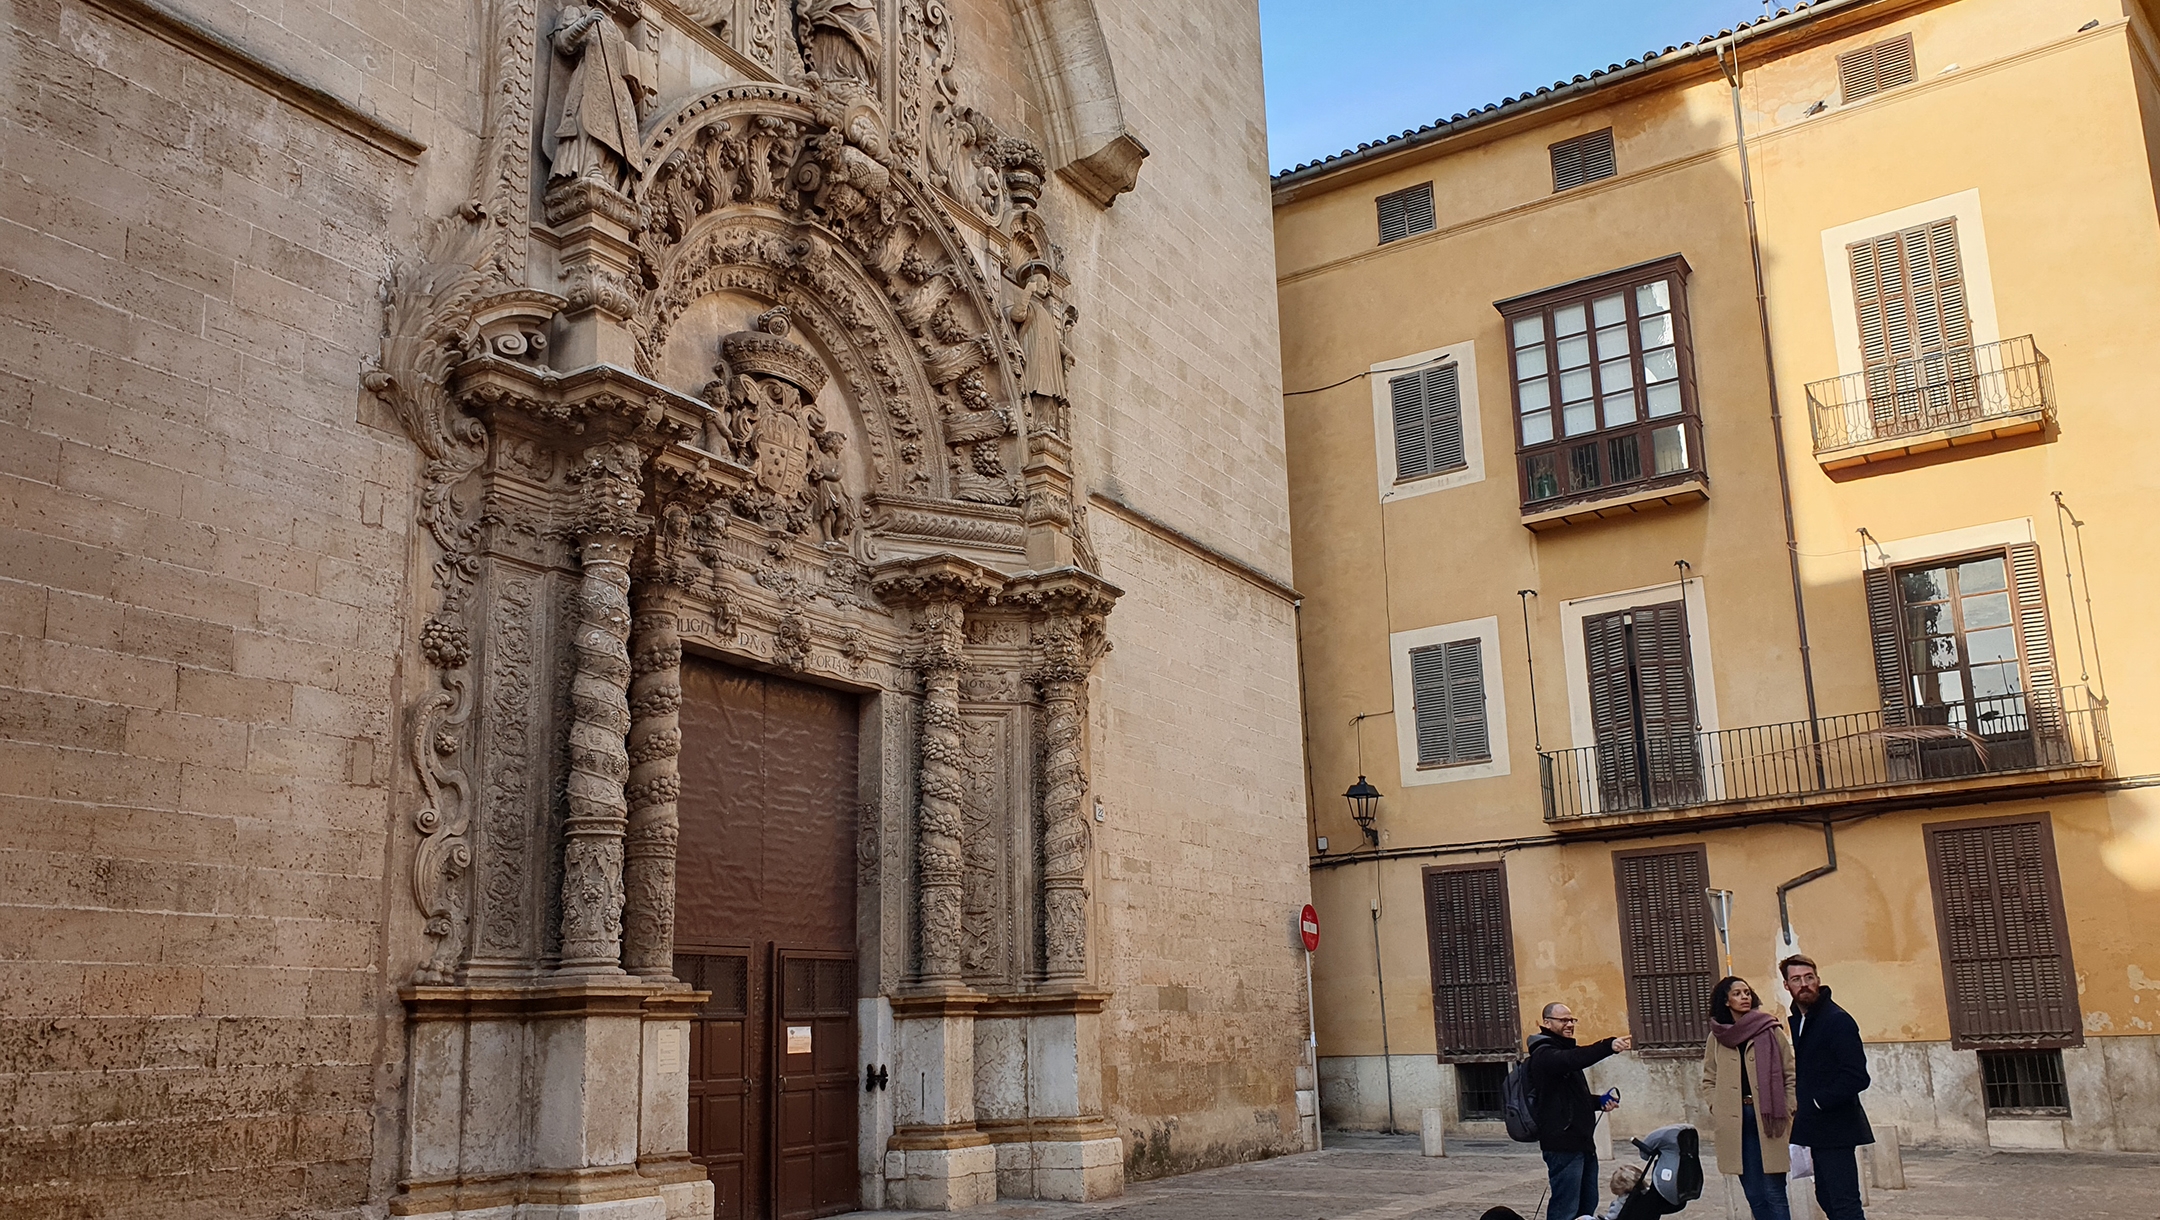 Dani Rotstein, pointing, explaining to German tourists about a church that used to be a synagogue in Palma de Mallorca, Spain on Feb. 11, 2019. Cnaan Liphshiz